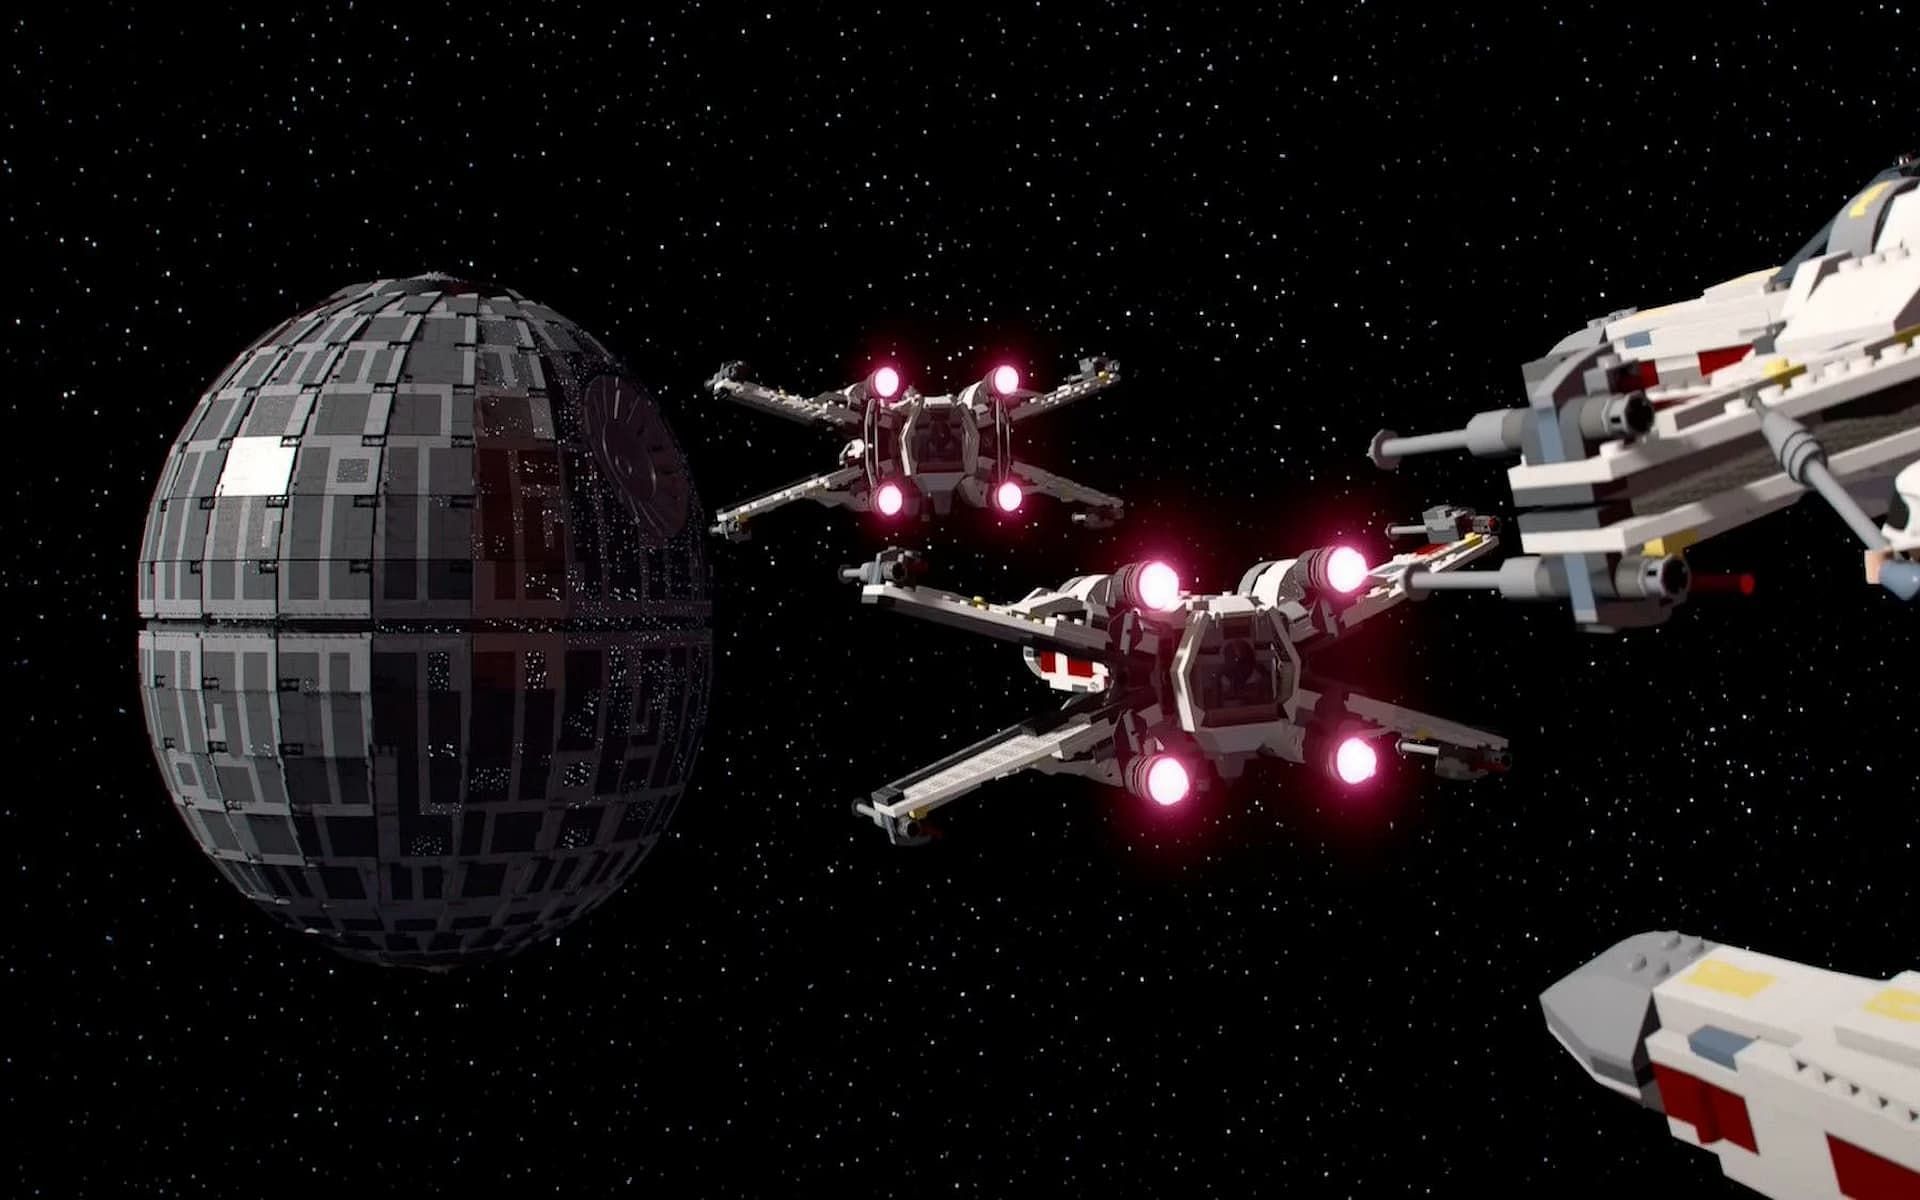 Several X-Wing fighters approach the Death Star (Image via TT Games)